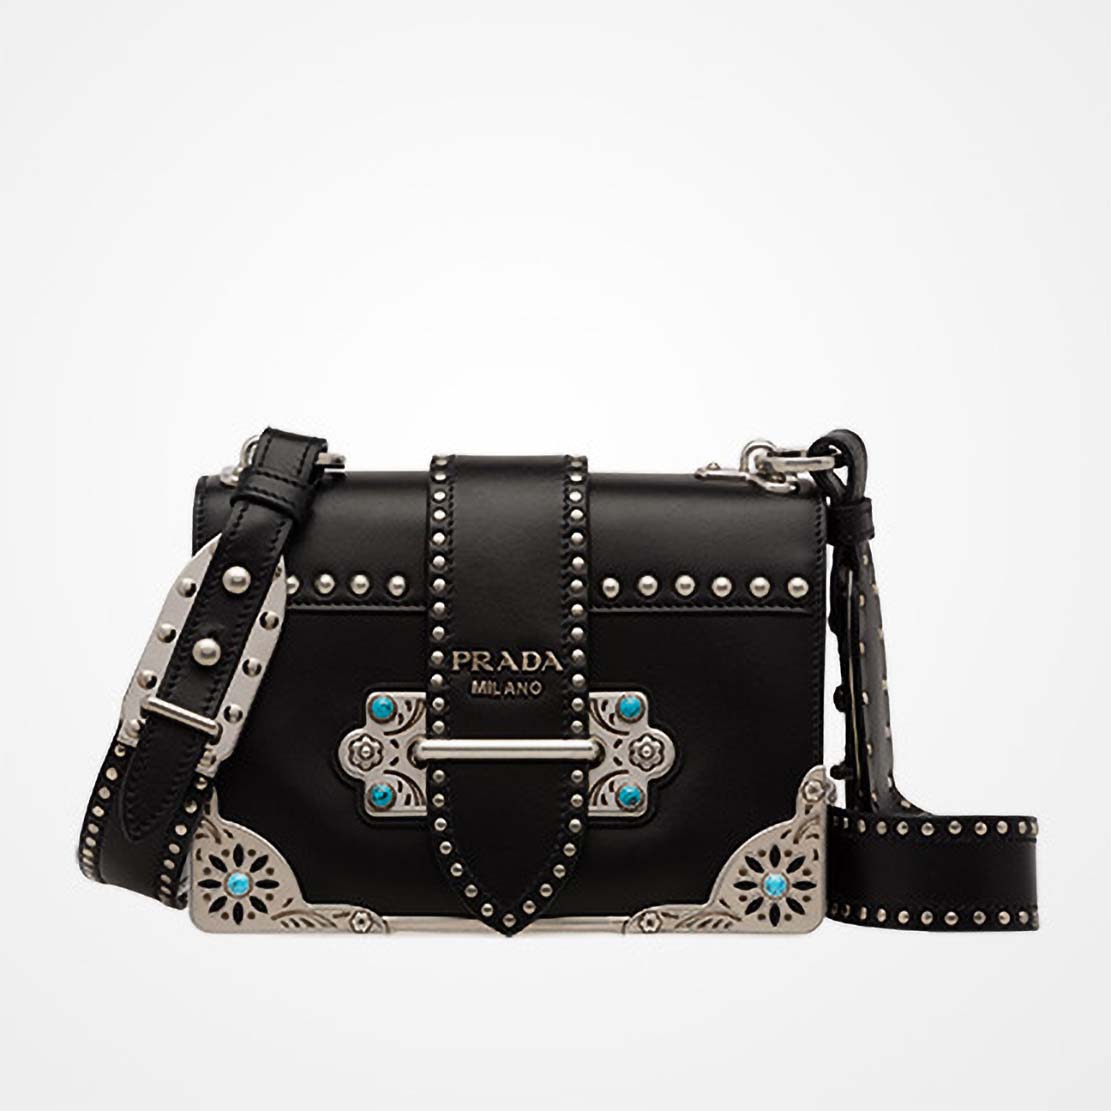 Prada Cahier Small Shoulder Bag in Studded Calf Leather